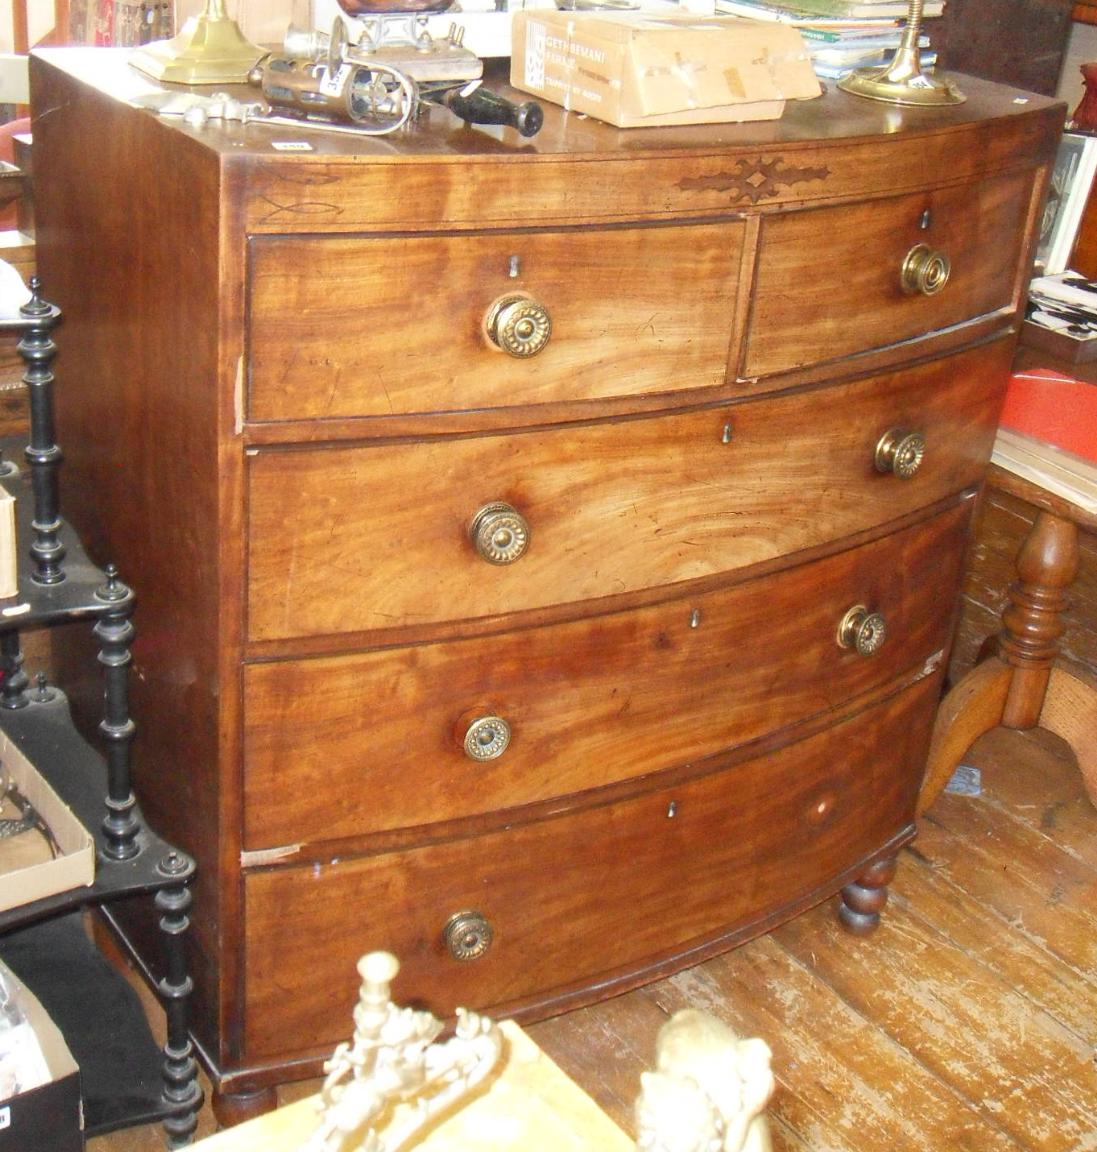 Early 19th c. mahogany bow-fronted chest of drawers with stringing inlay & brass knobs